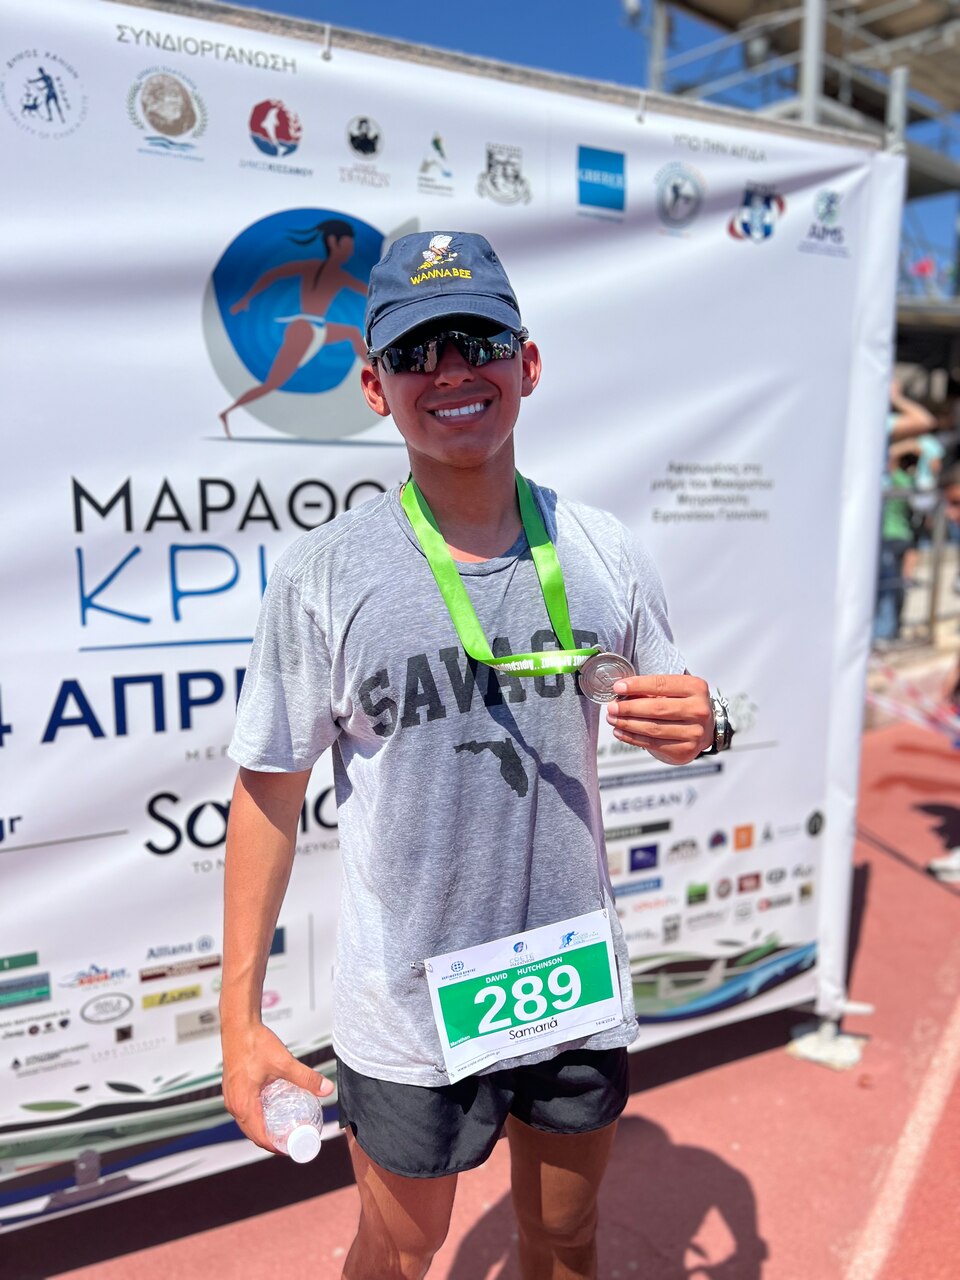 Builder Constructionman David Hutchinson, to assigned to Naval Facilities Engineering Systems Command, Europe, Africa, Central, completes the Crete Marathon.